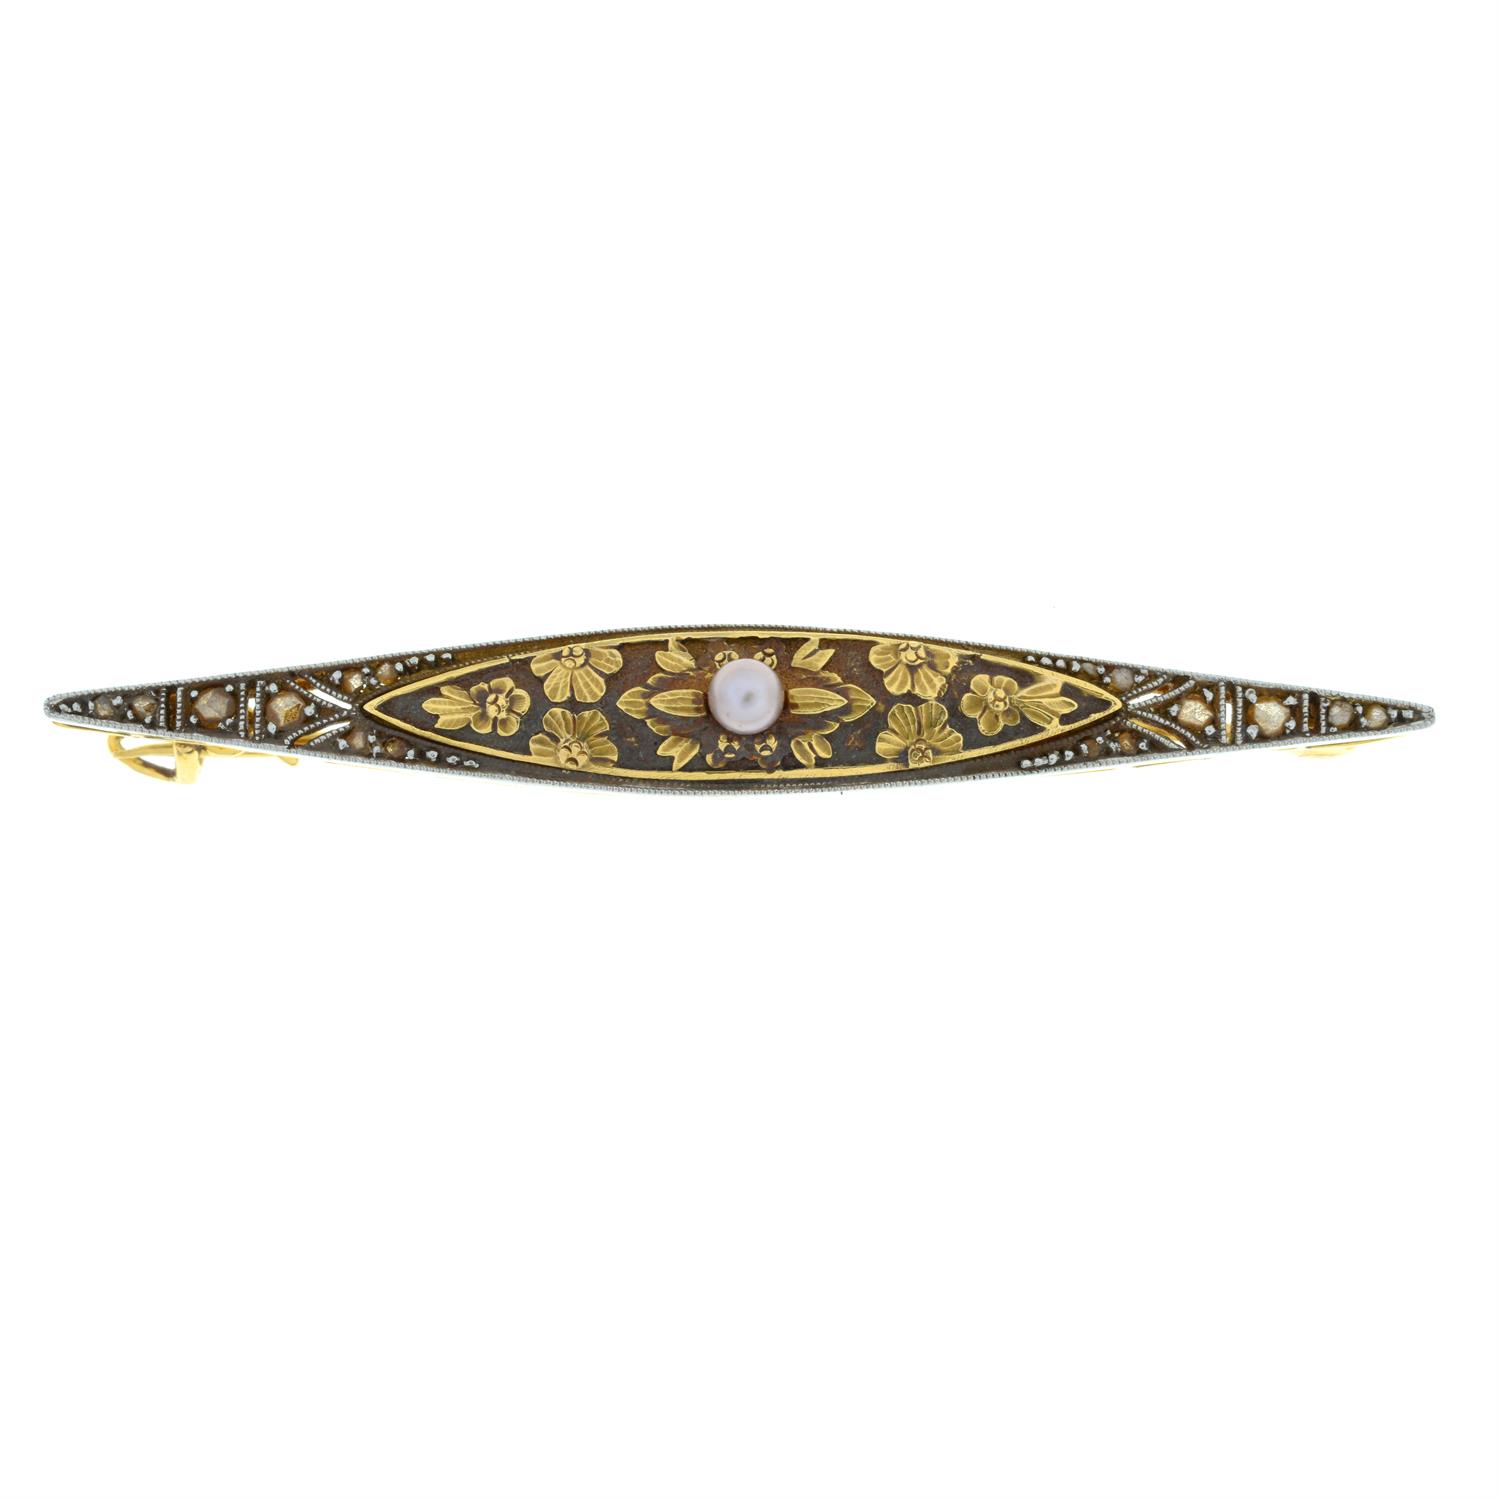 An early 20th century gold and platinum rose-cut diamond and seed pearl floral bar brooch. - Image 2 of 4